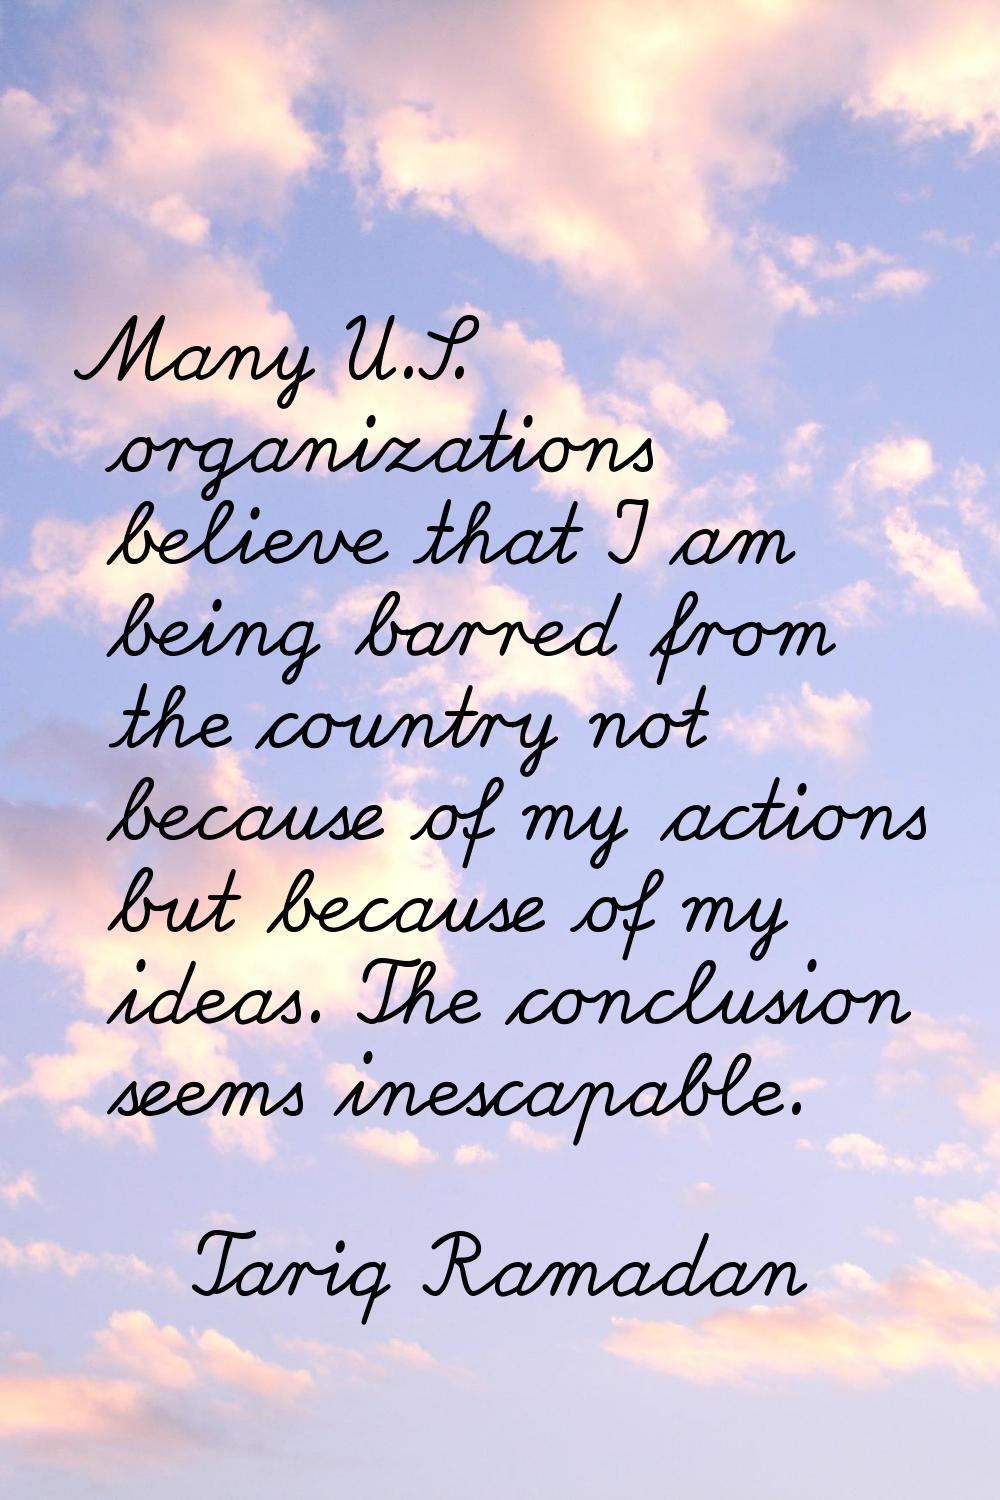 Many U.S. organizations believe that I am being barred from the country not because of my actions b